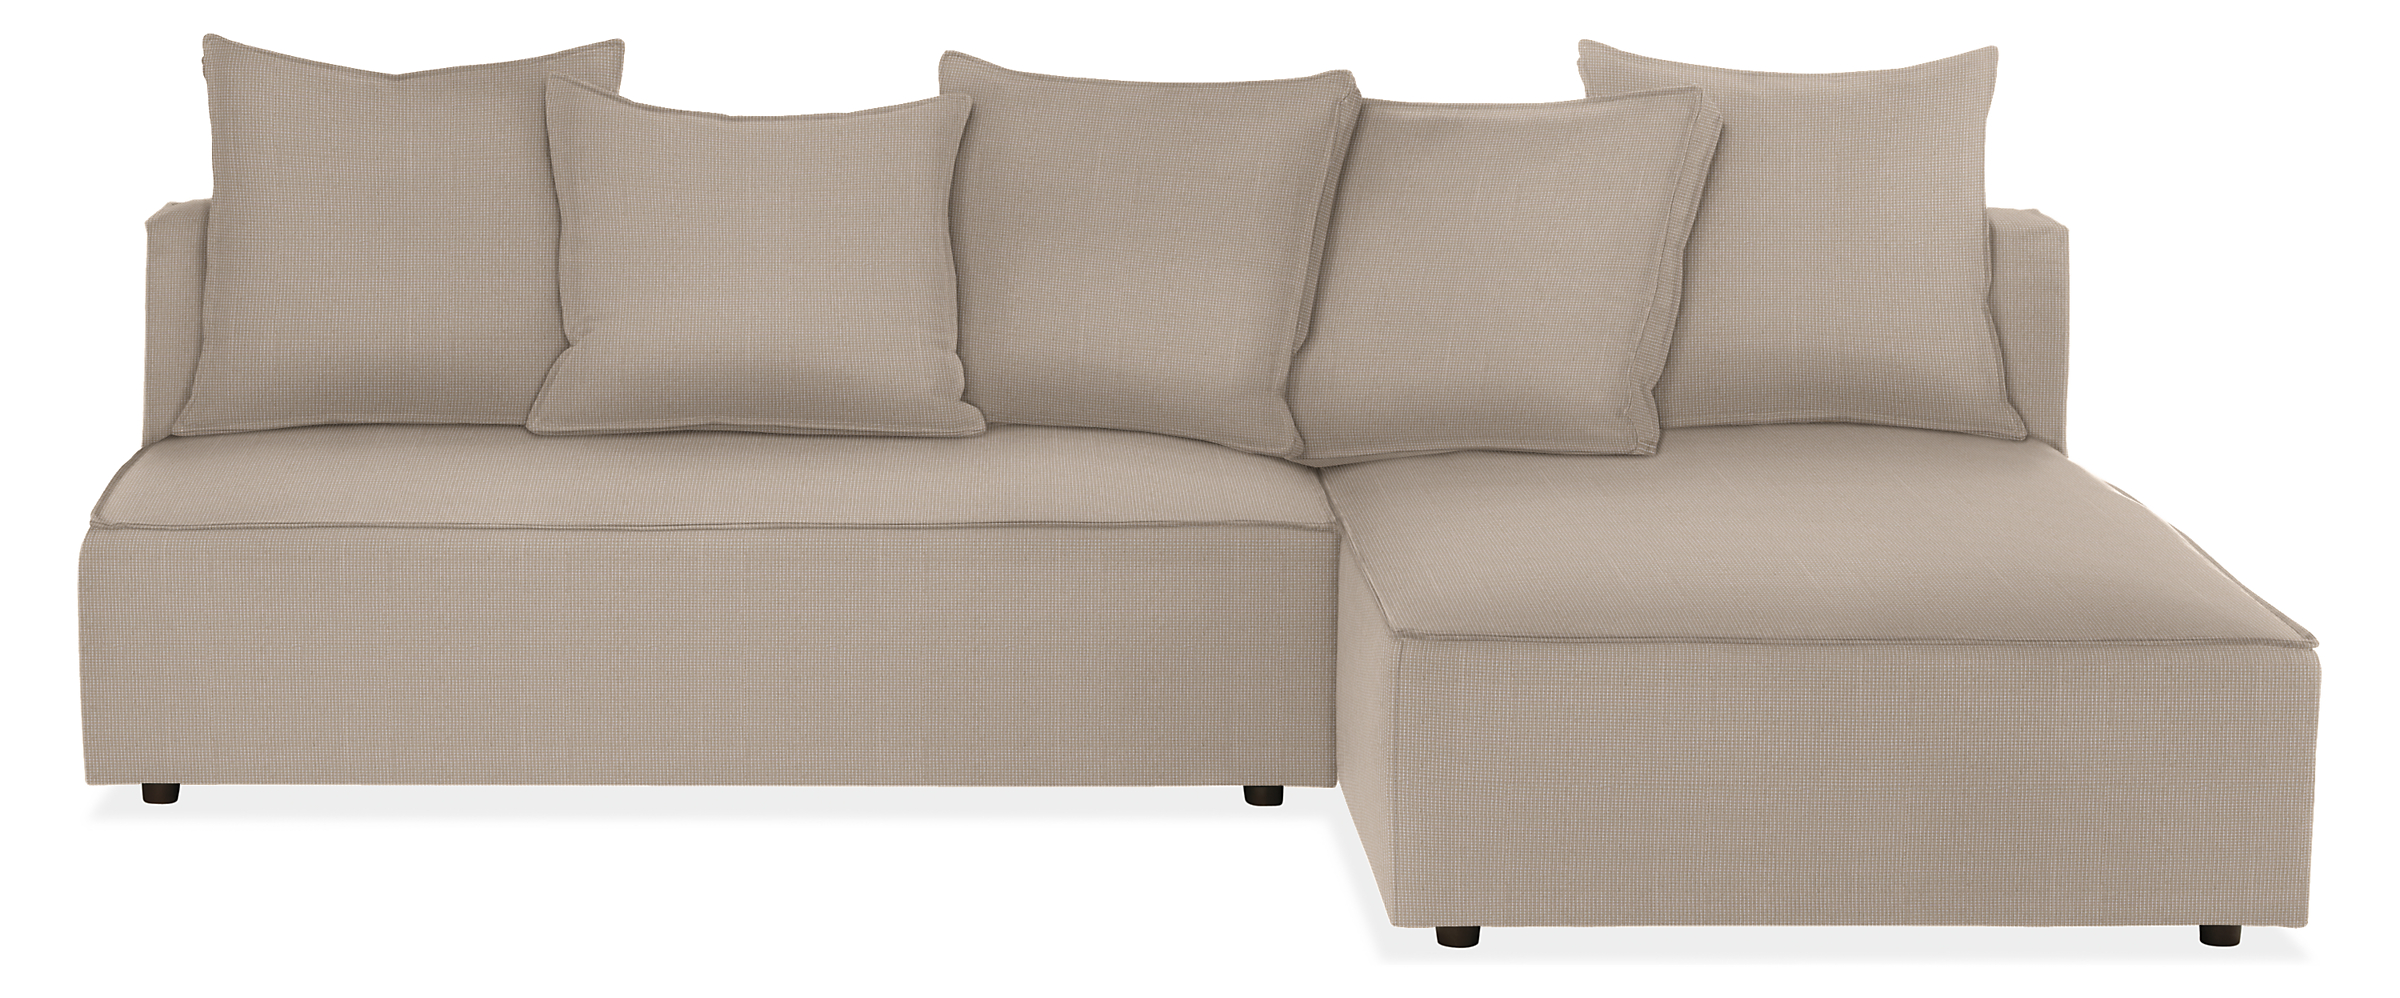 Oasis Sofas with Chaise